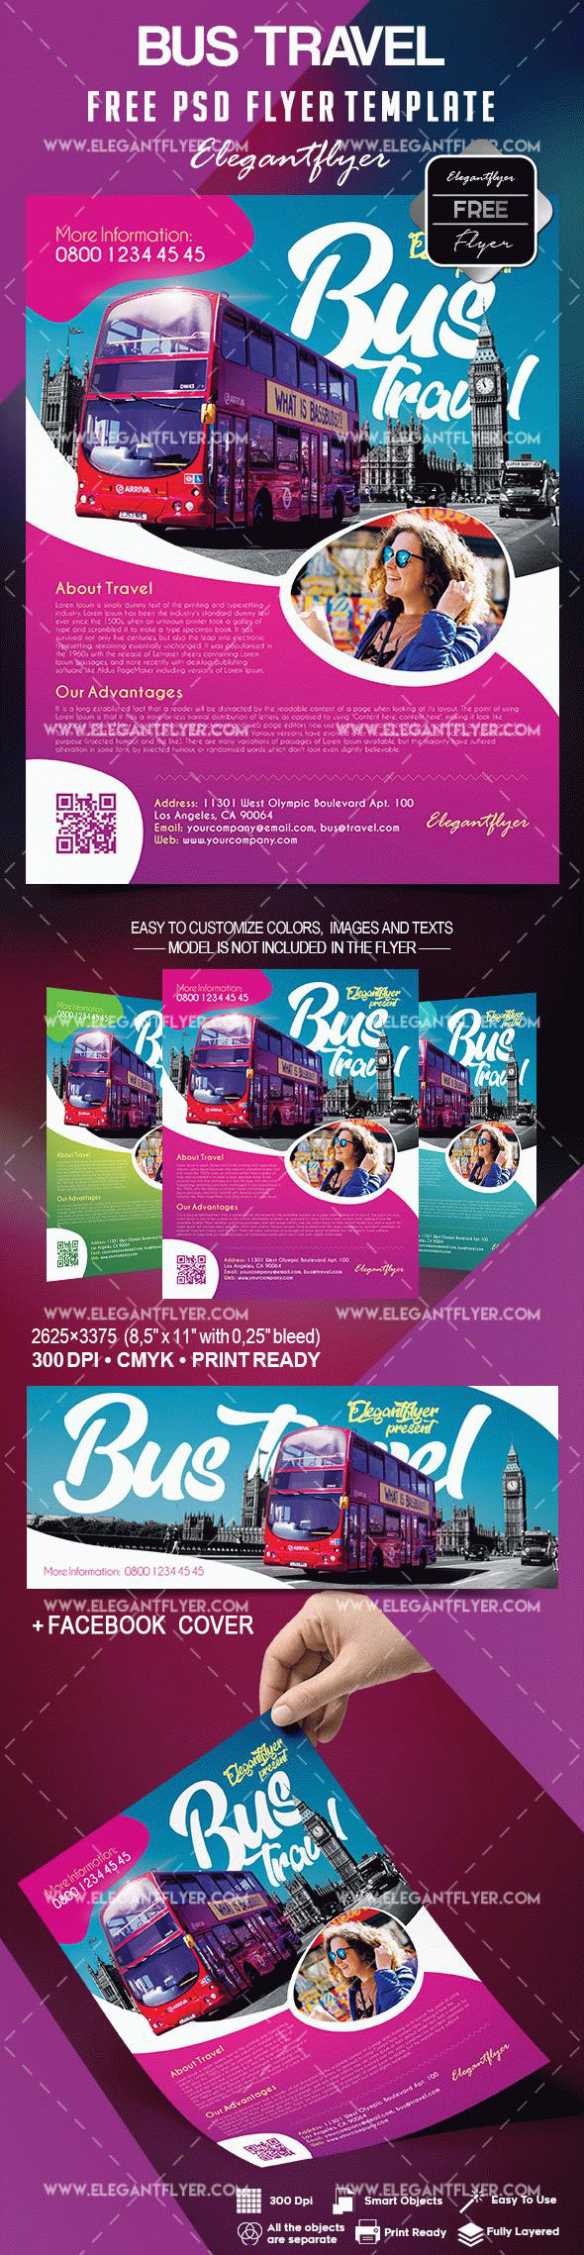 Free Bus Travel Flyer Template On Behance inside Bus Trip Flyer Templates Free